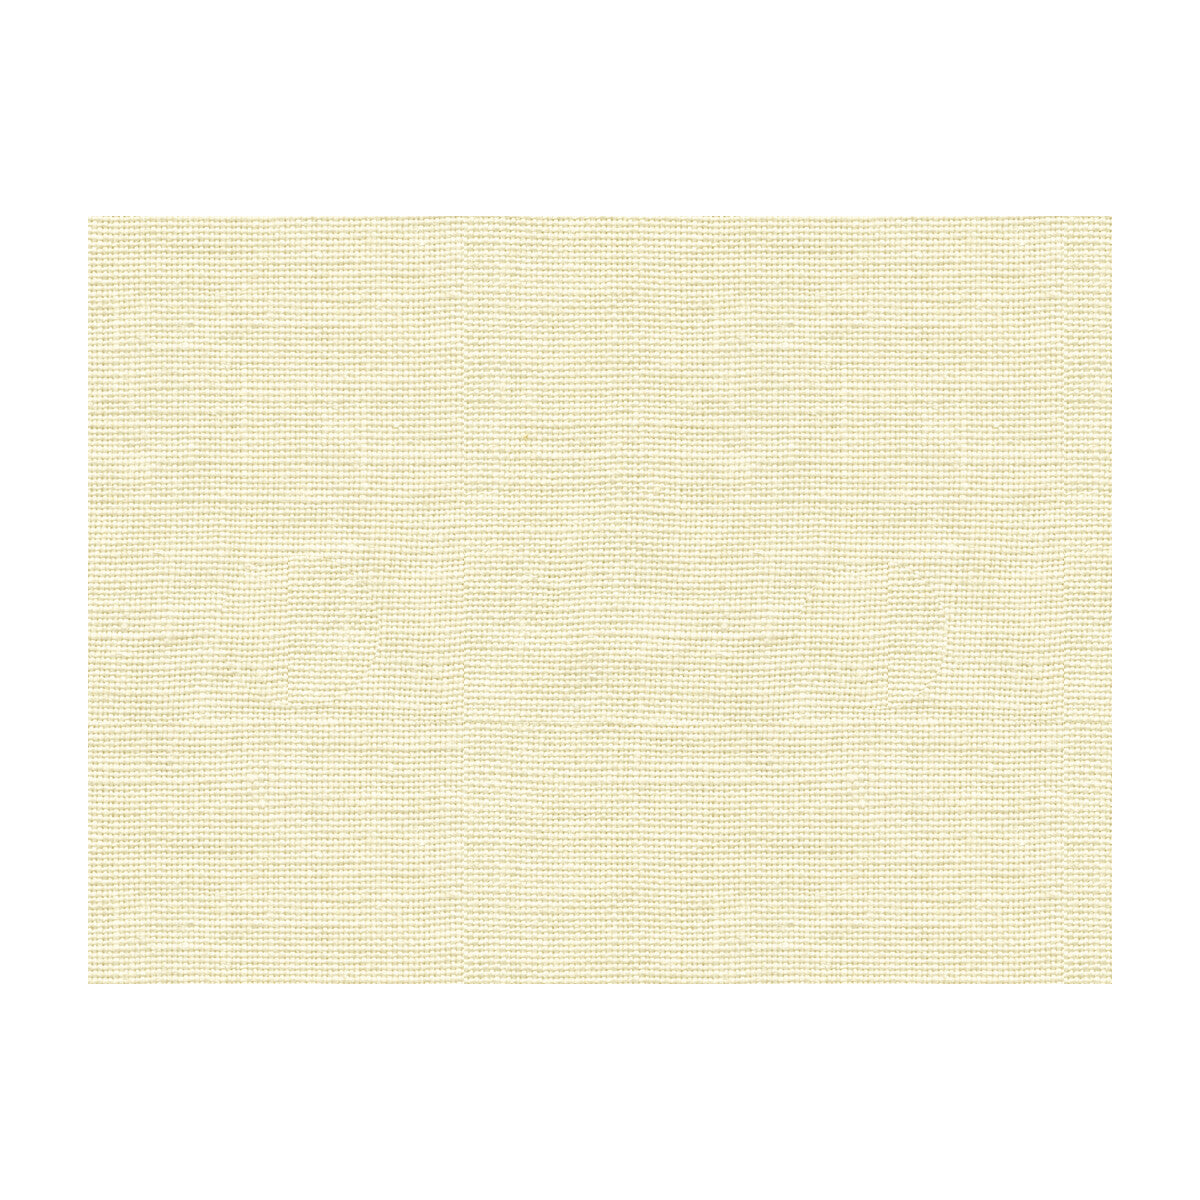 Kravet Basics fabric in 33767-101 color - pattern 33767.101.0 - by Kravet Basics in the Perfect Plains collection